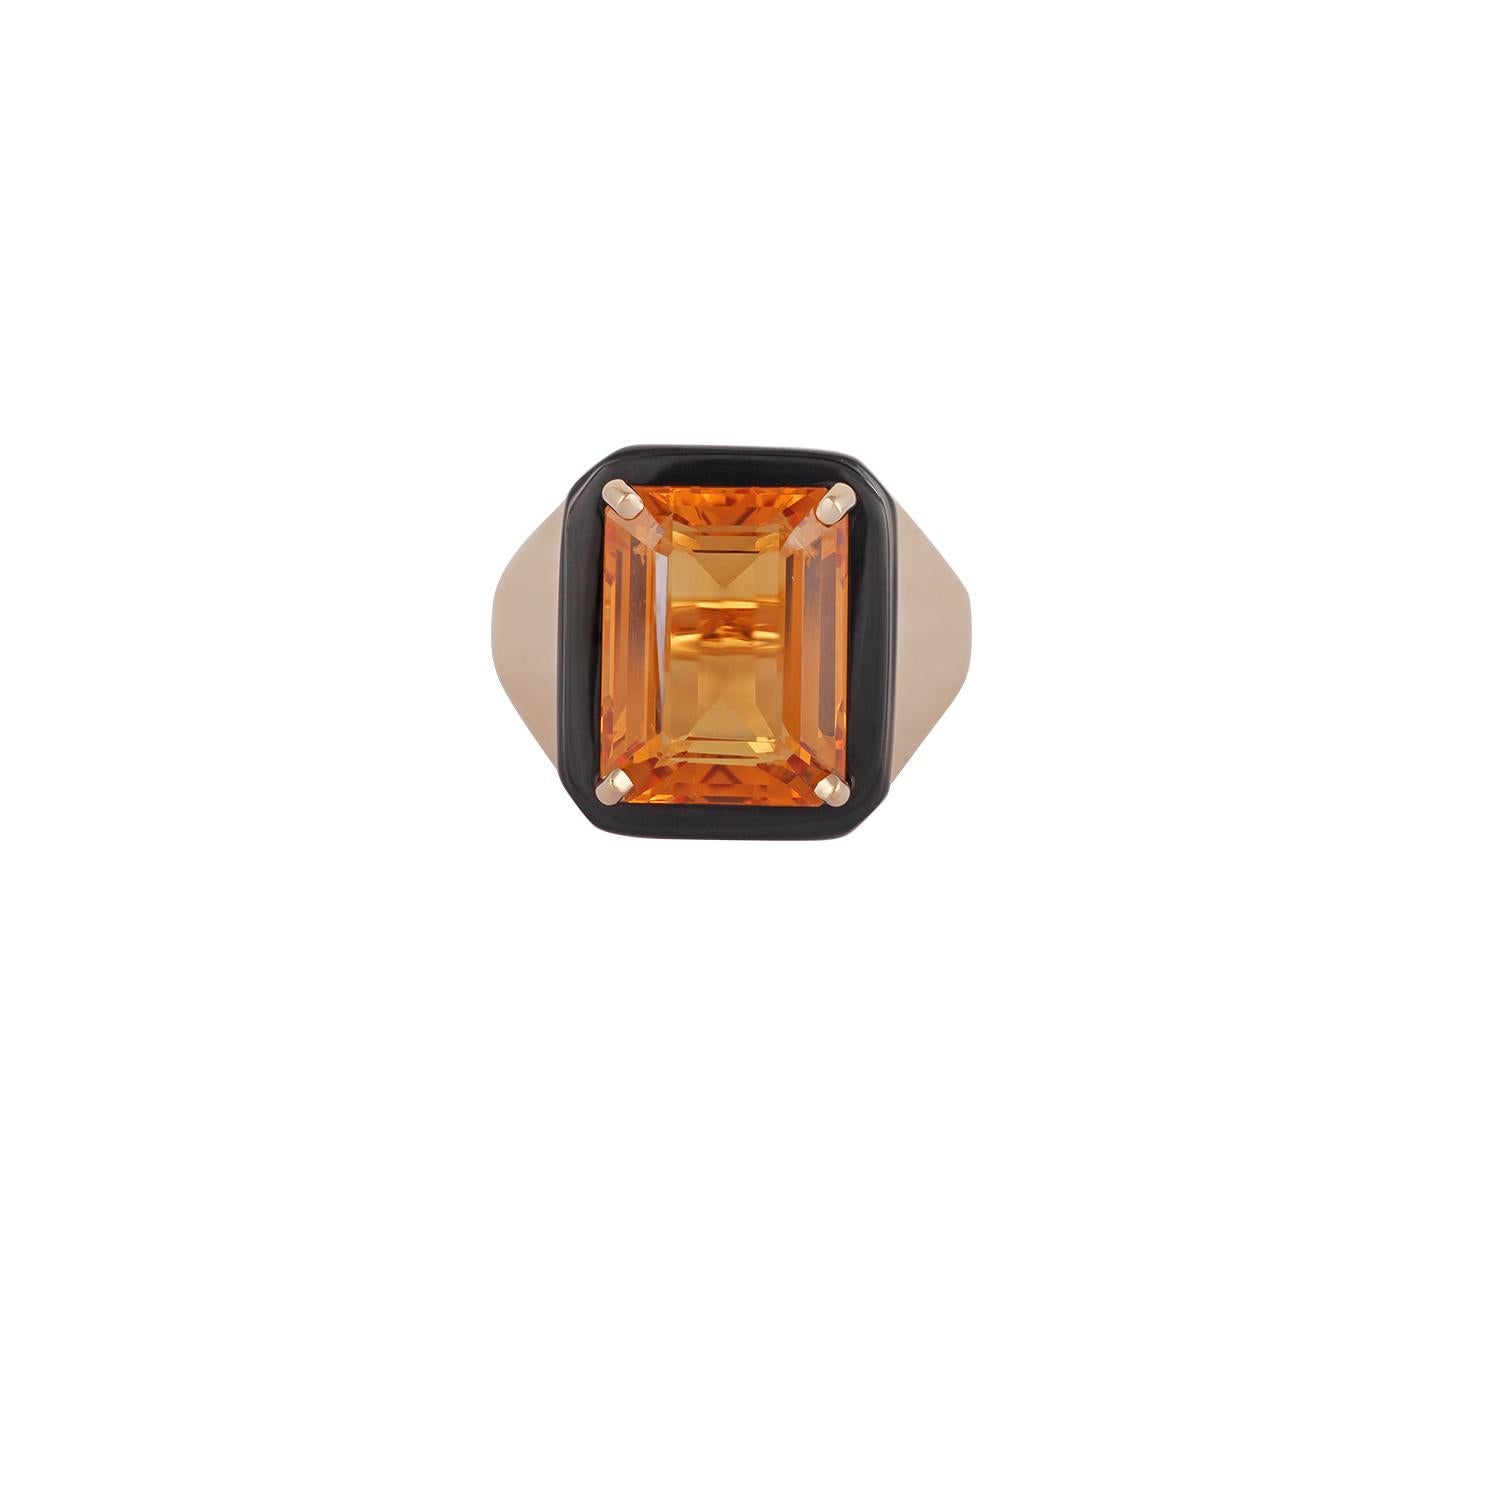 Its an elegant ring studded in 18k yellow gold with 1 piece of octagon shaped citrine weight 7.06 carat surrounded by the frame of black onyx weight 2.39 carat, this entire ring studded in 18k yellow gold weight 8.73 grams, ring size can be change